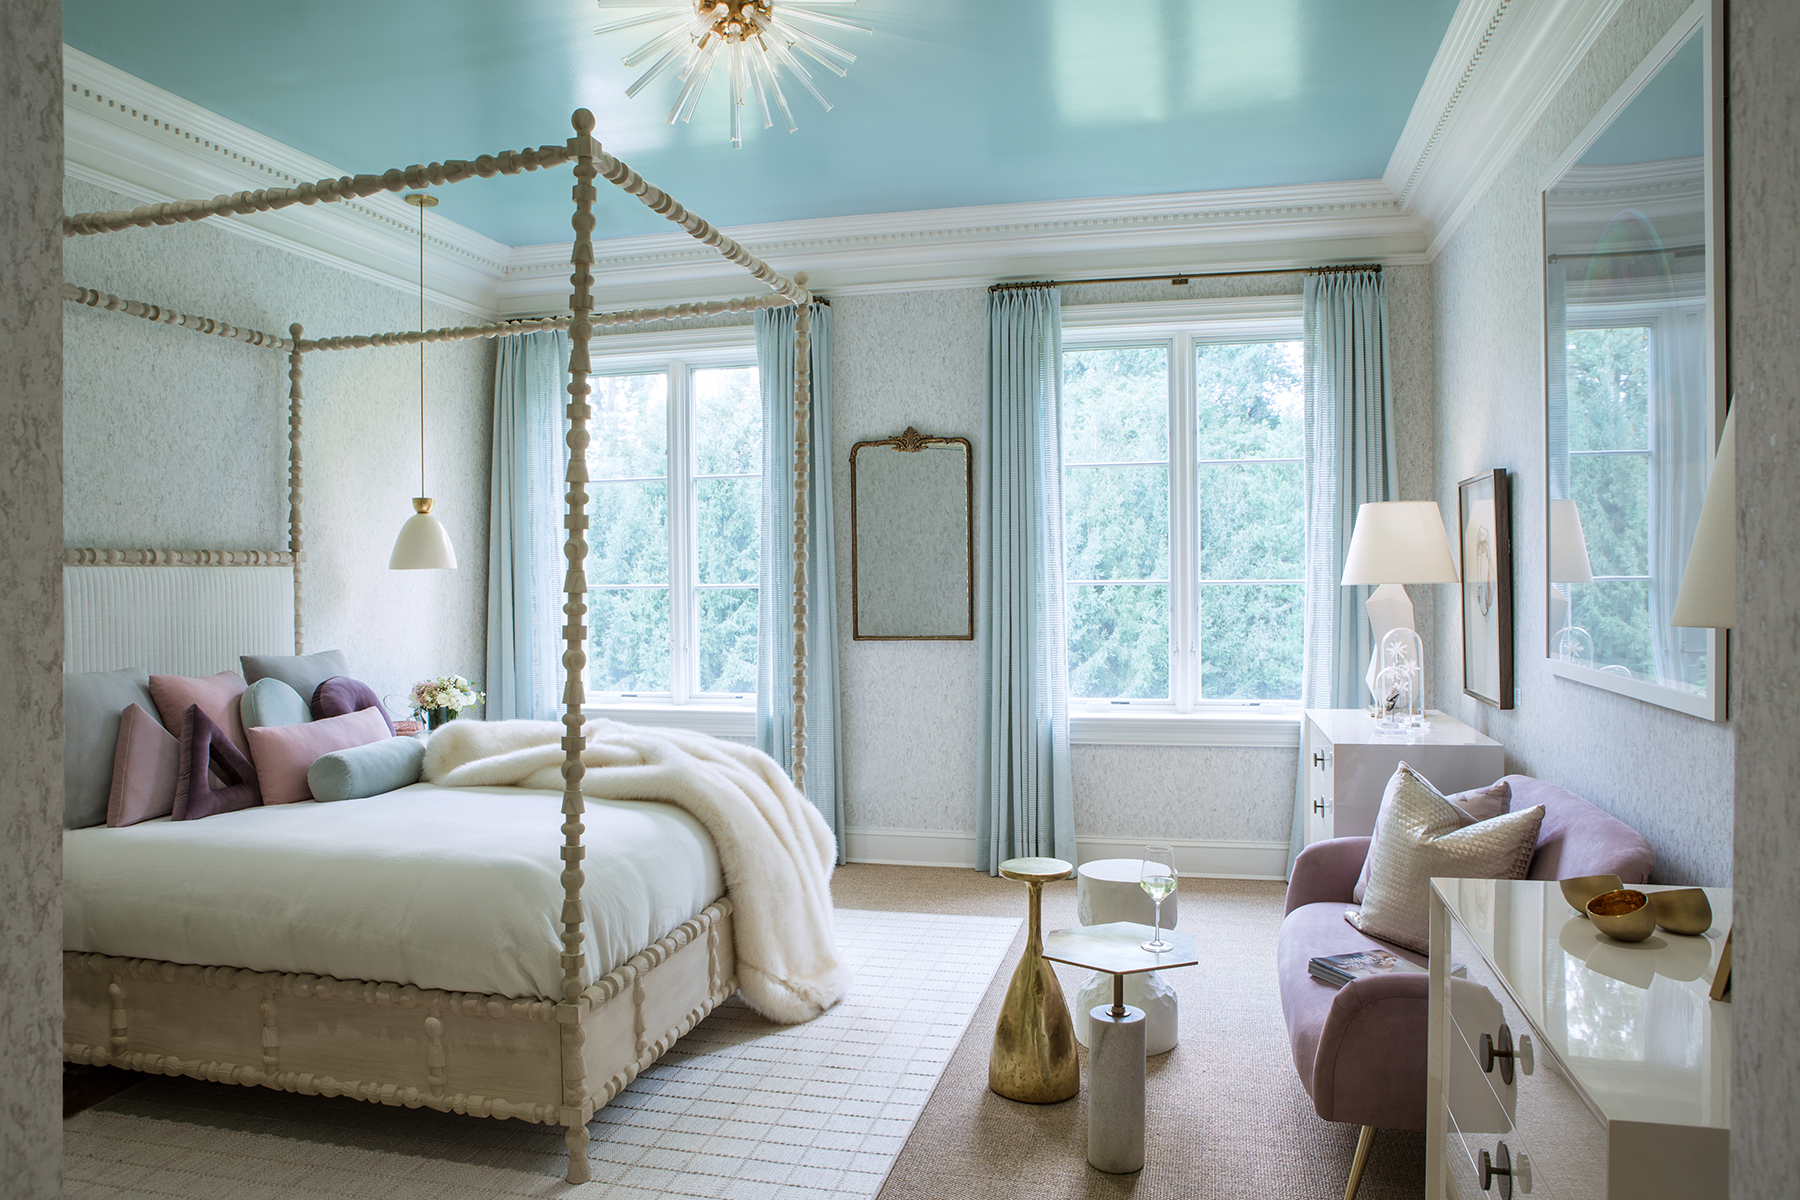 Blue lacquered ceiling in bedroom reflects light